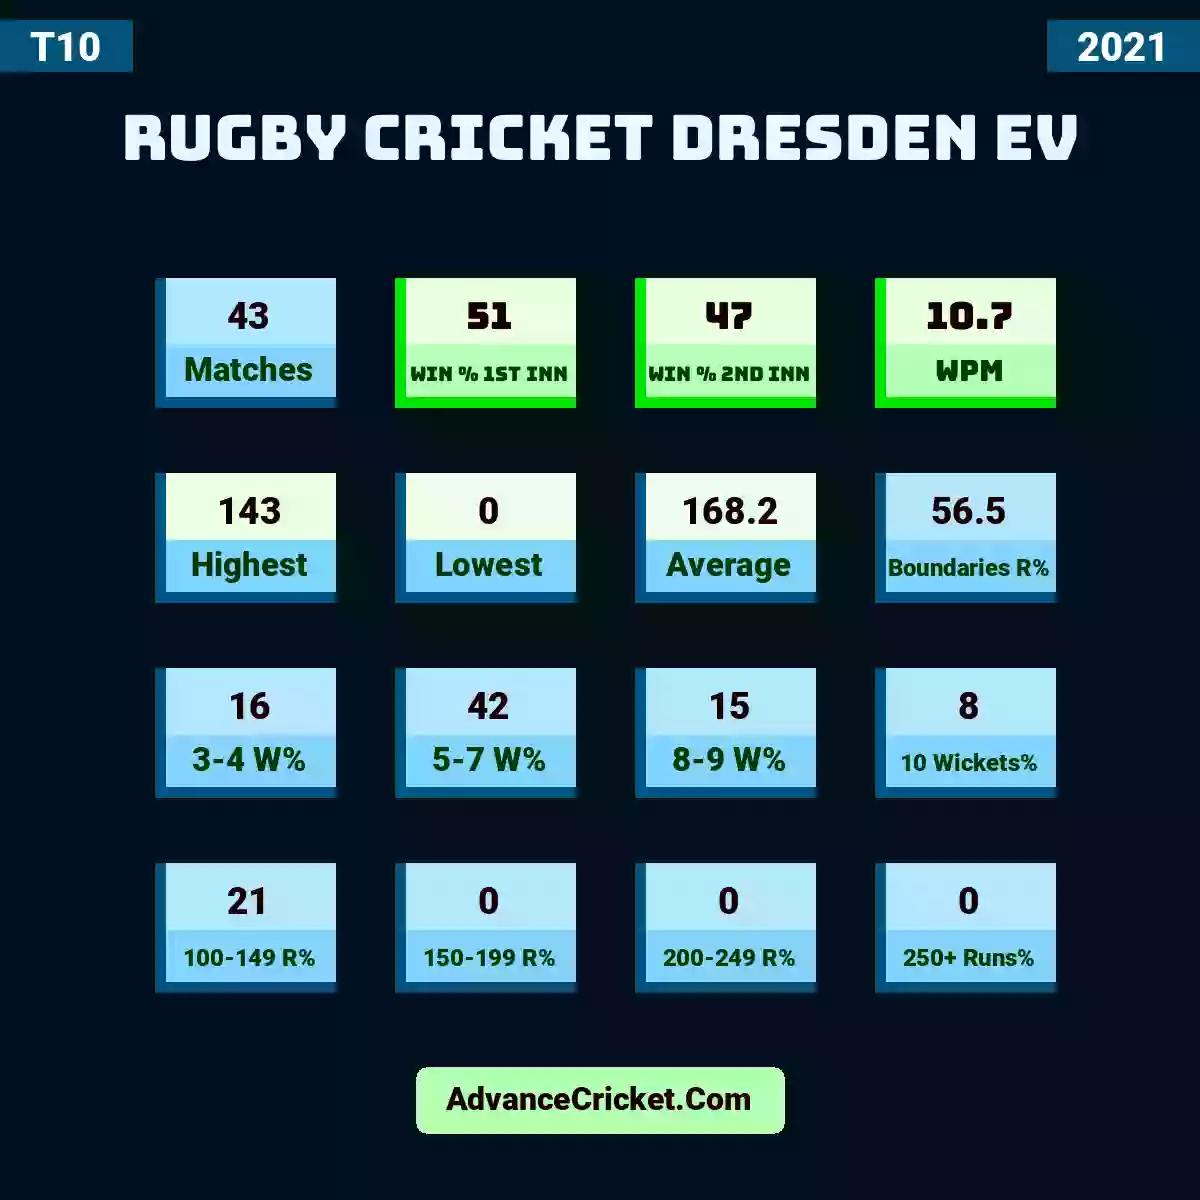 Image showing Rugby Cricket Dresden eV with Matches: 43, Win % 1st Inn: 51, Win % 2nd Inn: 47, WPM: 10.7, Highest: 143, Lowest: 0, Average: 168.2, Boundaries R%: 56.5, 3-4 W%: 16, 5-7 W%: 42, 8-9 W%: 15, 10 Wickets%: 8, 100-149 R%: 21, 150-199 R%: 0, 200-249 R%: 0, 250+ Runs%: 0.